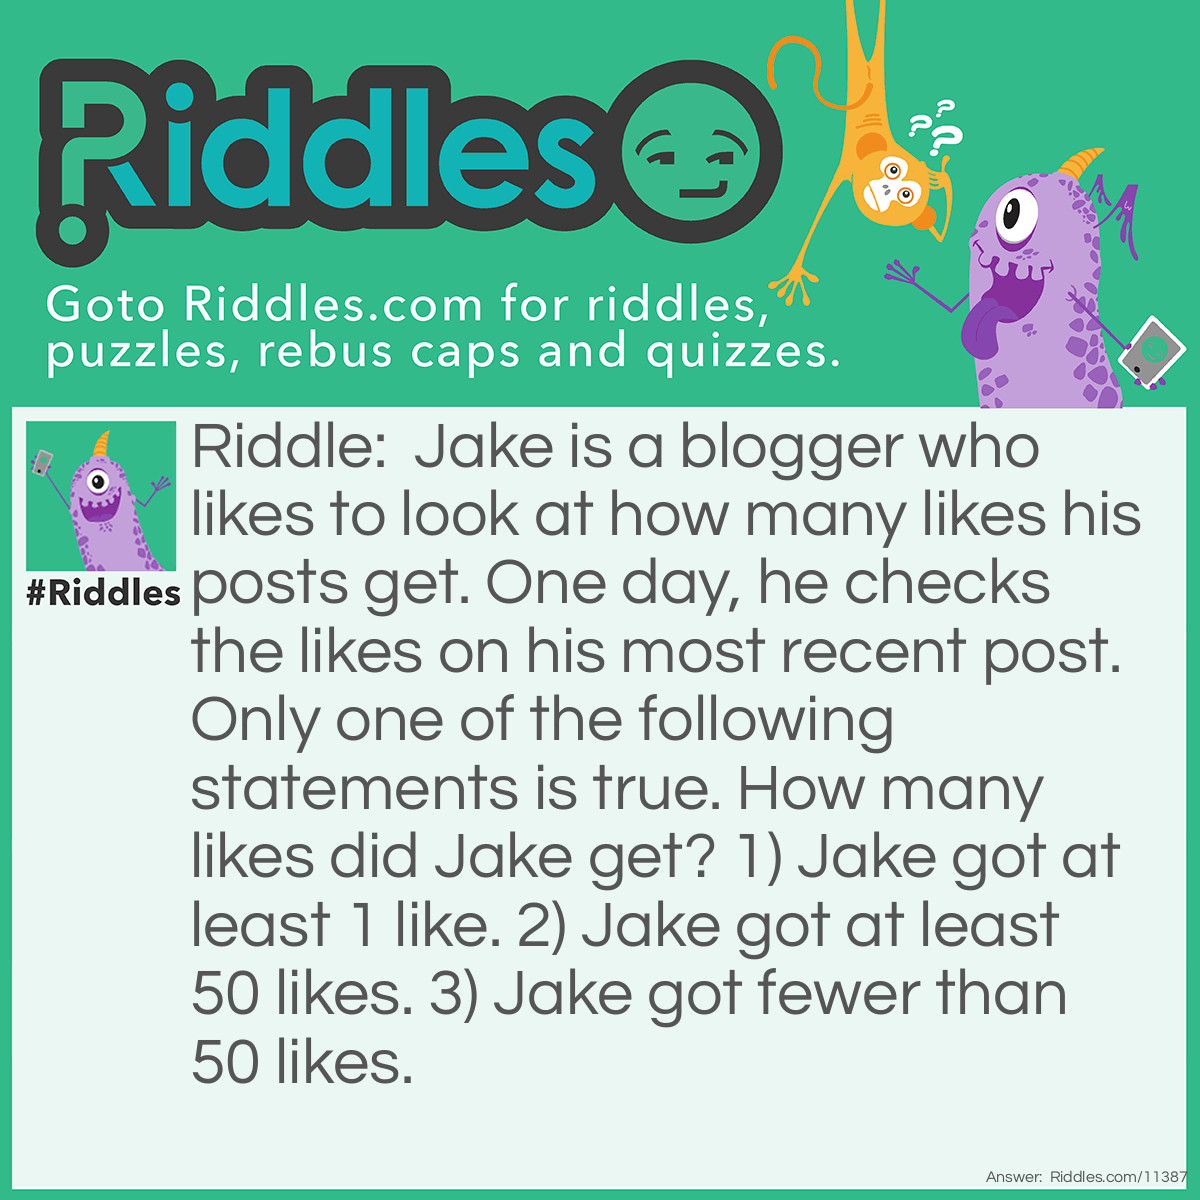 Riddle: Jake is a blogger who likes to look at how many likes his posts get. One day, he checks the likes on his most recent post. Only one of the following statements is true. How many likes did Jake get? 1) Jake got at least 1 like. 2) Jake got at least 50 likes. 3) Jake got fewer than 50 likes. Answer: Only the third statement is true; Jake got zero likes. If the first statement is true, then he has at least one like, but the third statement is also true, assuming that this number is less than 50; this contradicts the conditions. If the second statement is true, then Jake has at least 50 likes, but the first statement automatically becomes true, too. If the third statement is true, then Jake has fewer than 50 likes; this makes the second statement wrong, but for the first statement to be wrong, too, the post should have gotten less than one like. Therefore, Jake got zero likes on his most recent post.